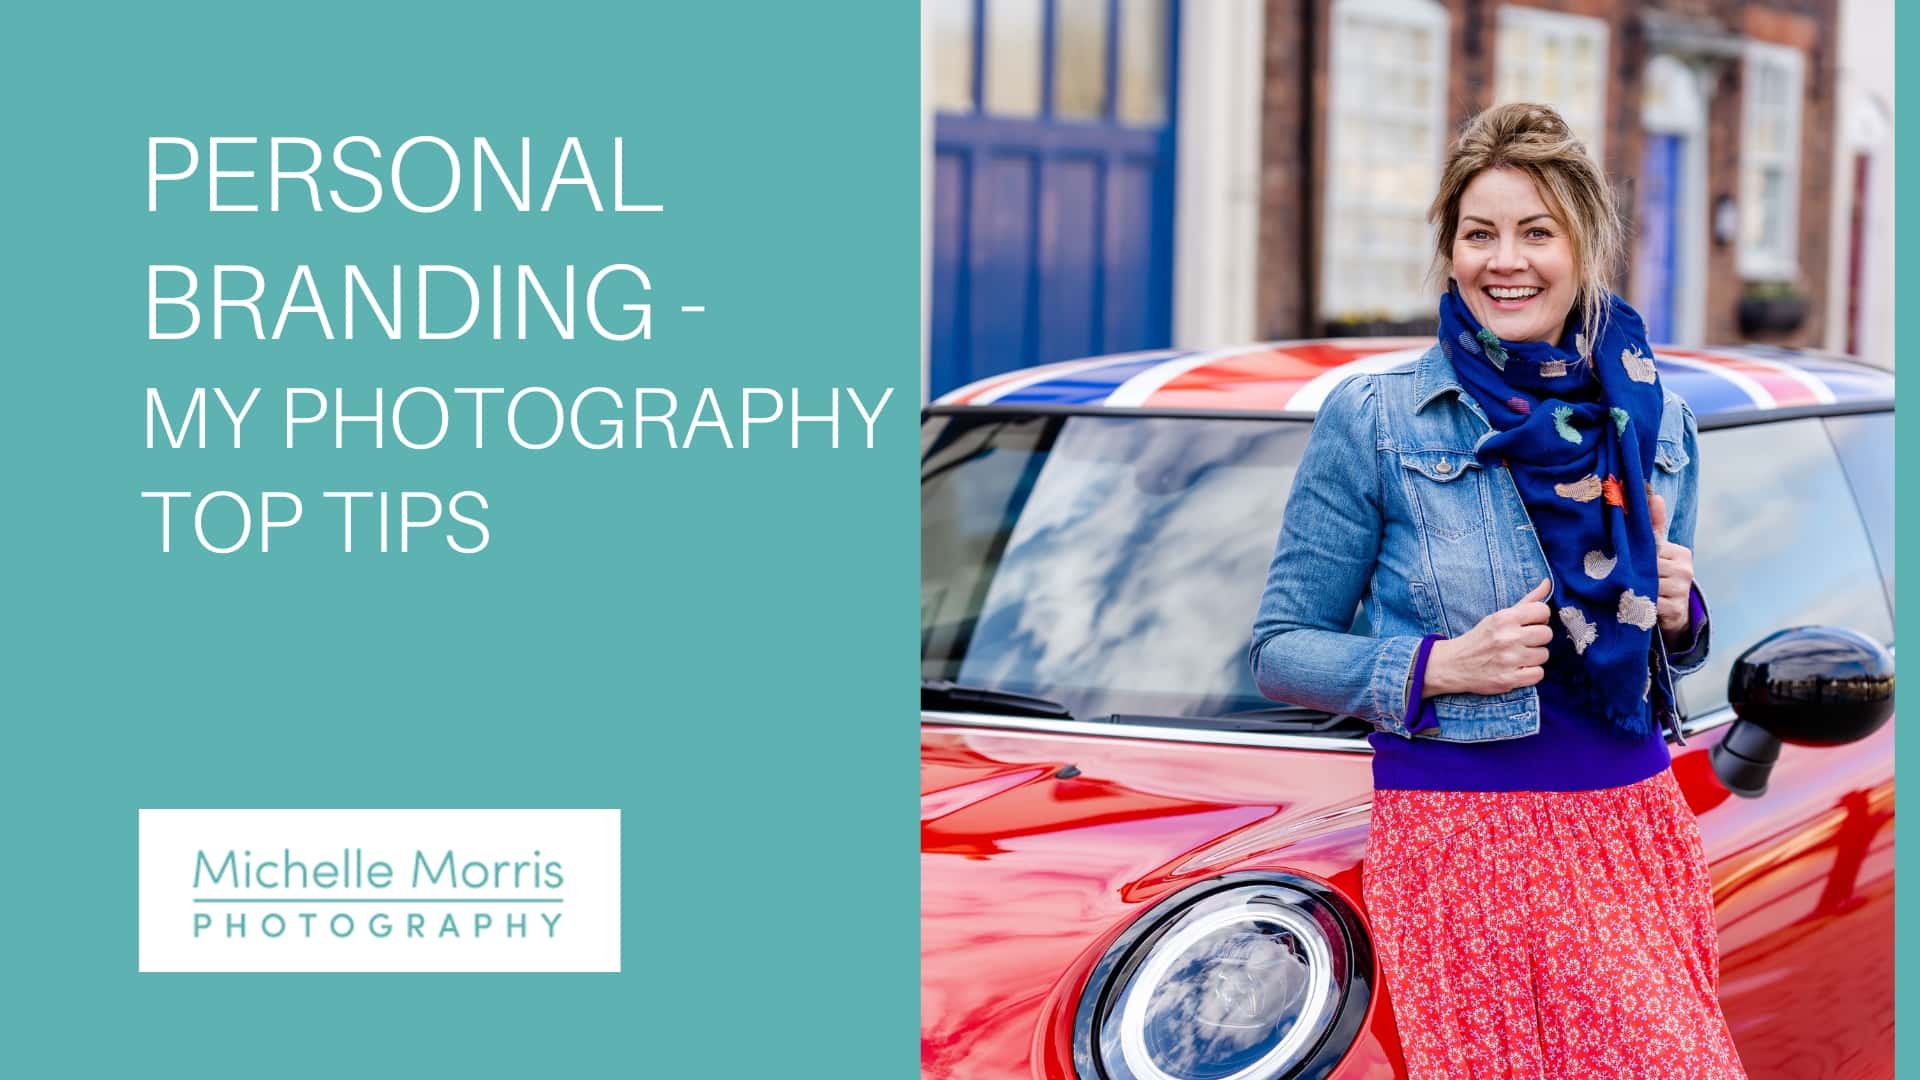 Personal branding photography top tips